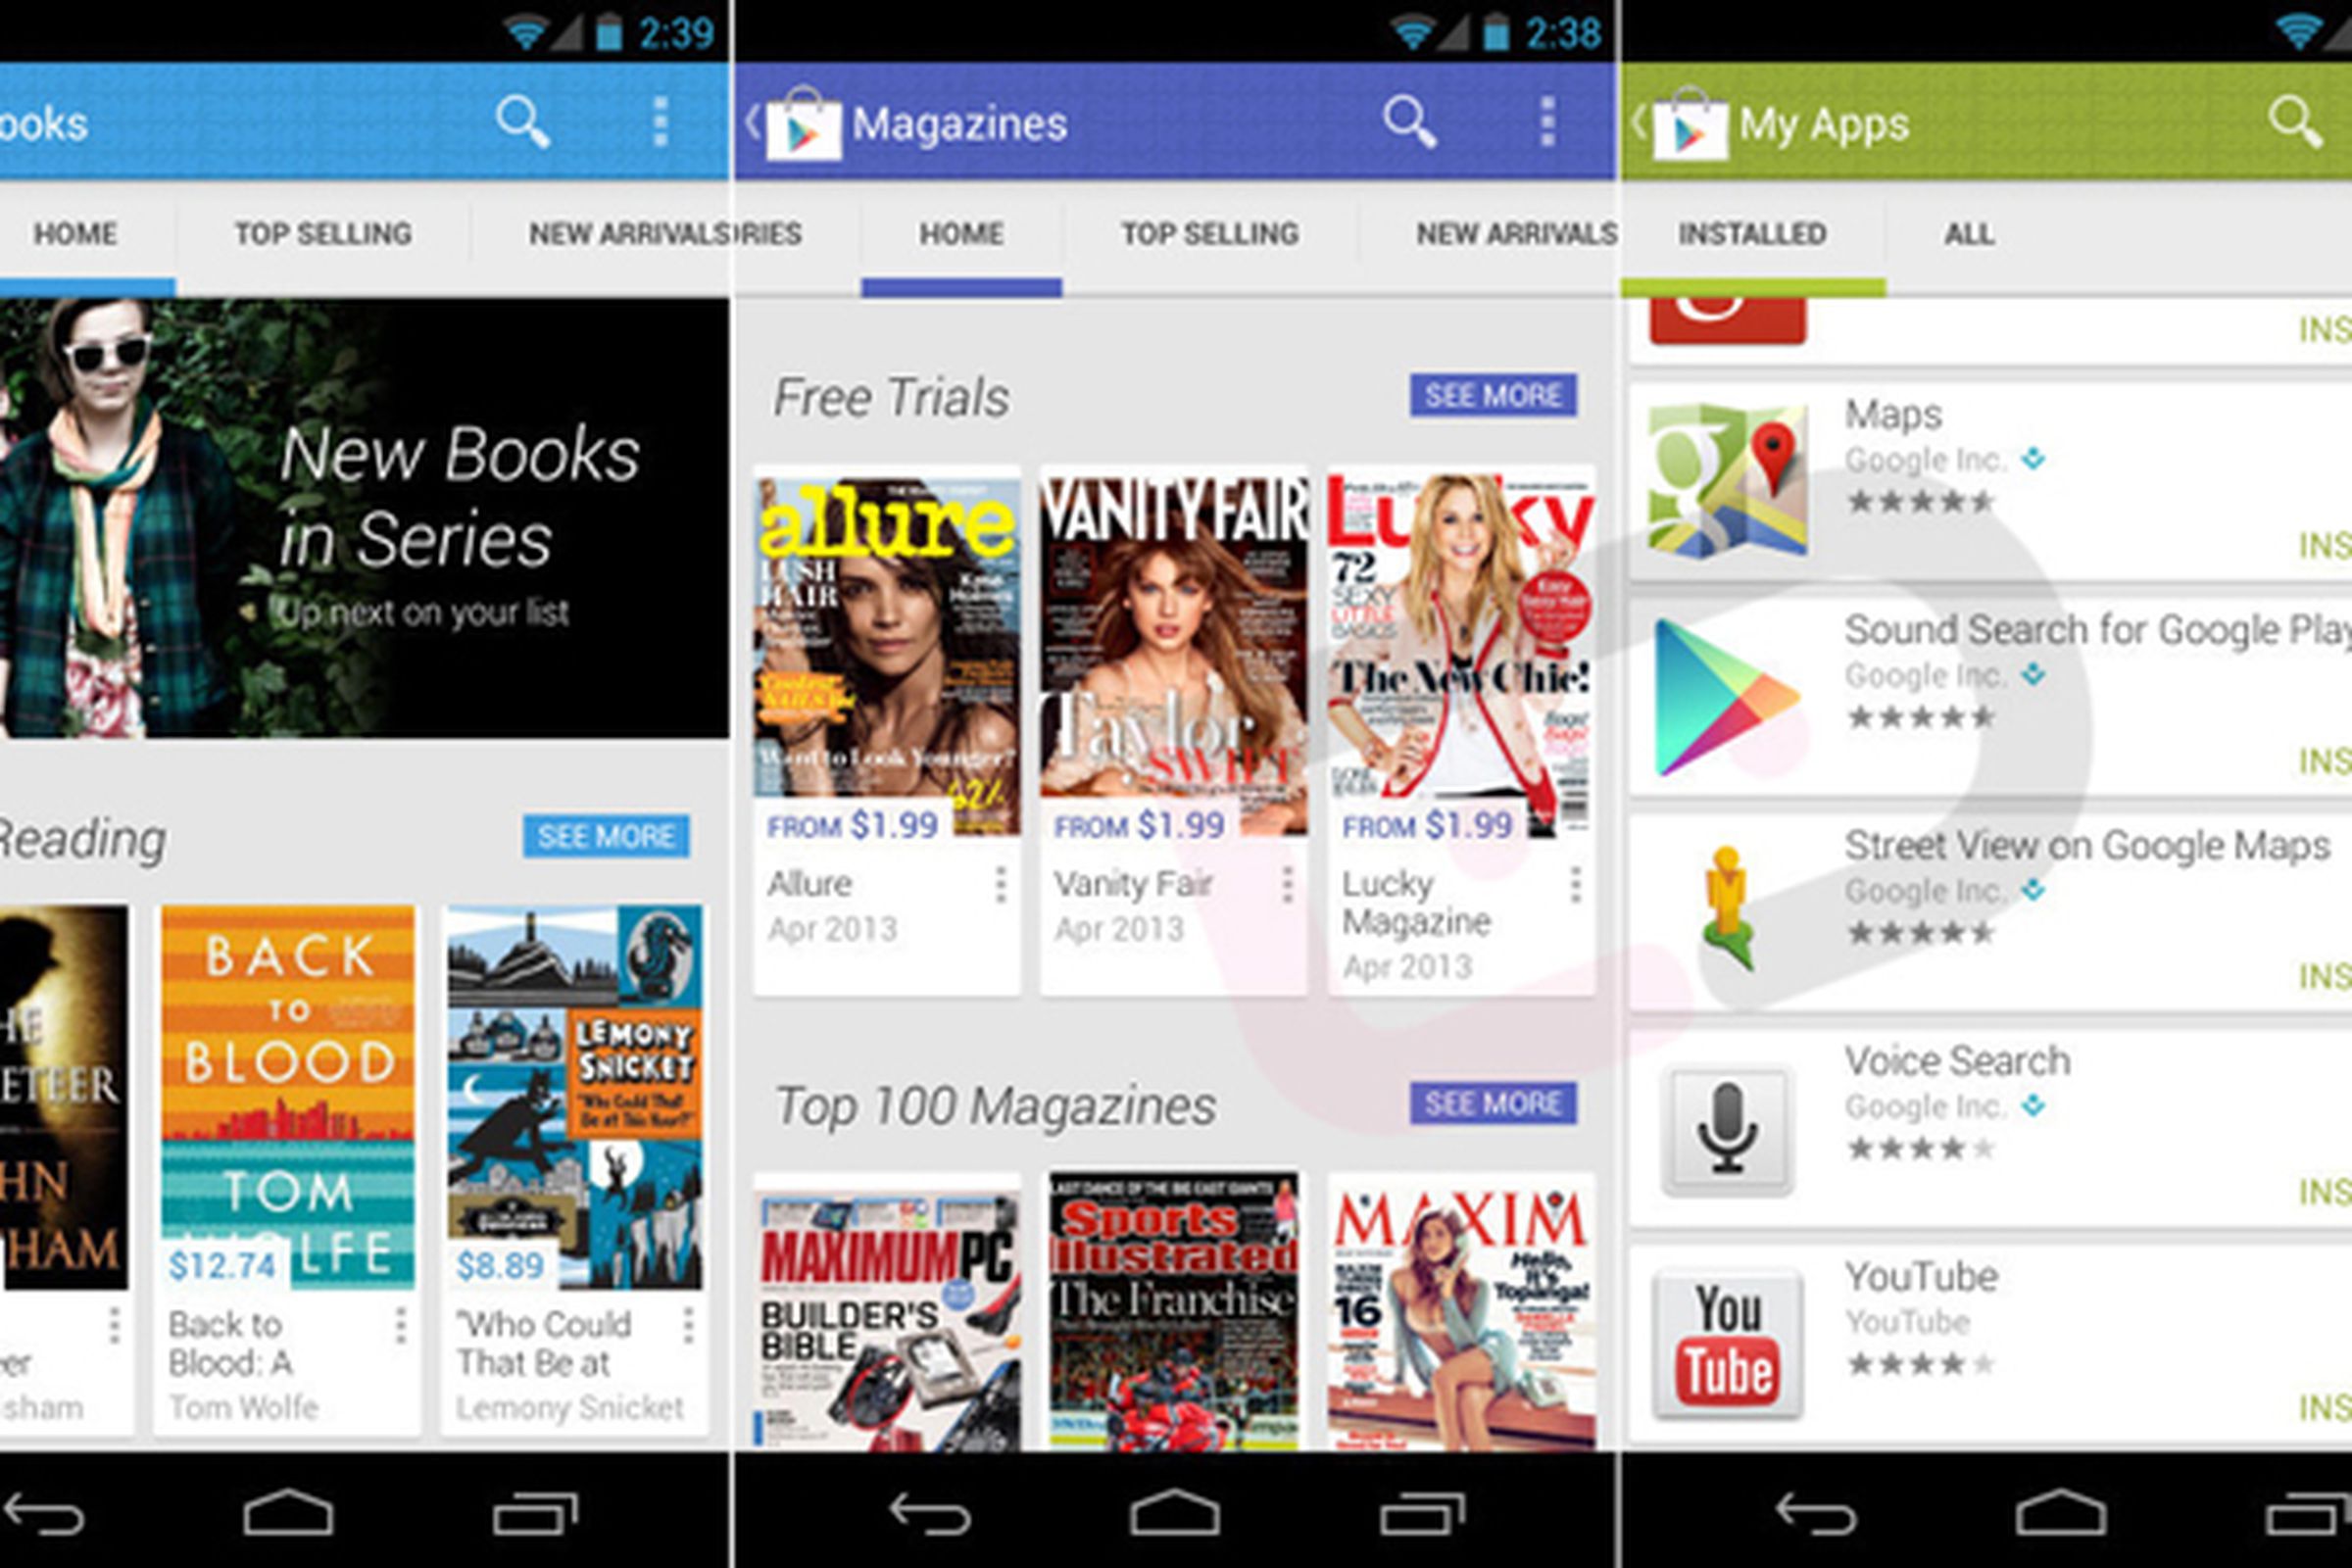 Google Play Store 4.0 leaked redesign (DROIDLIFE)